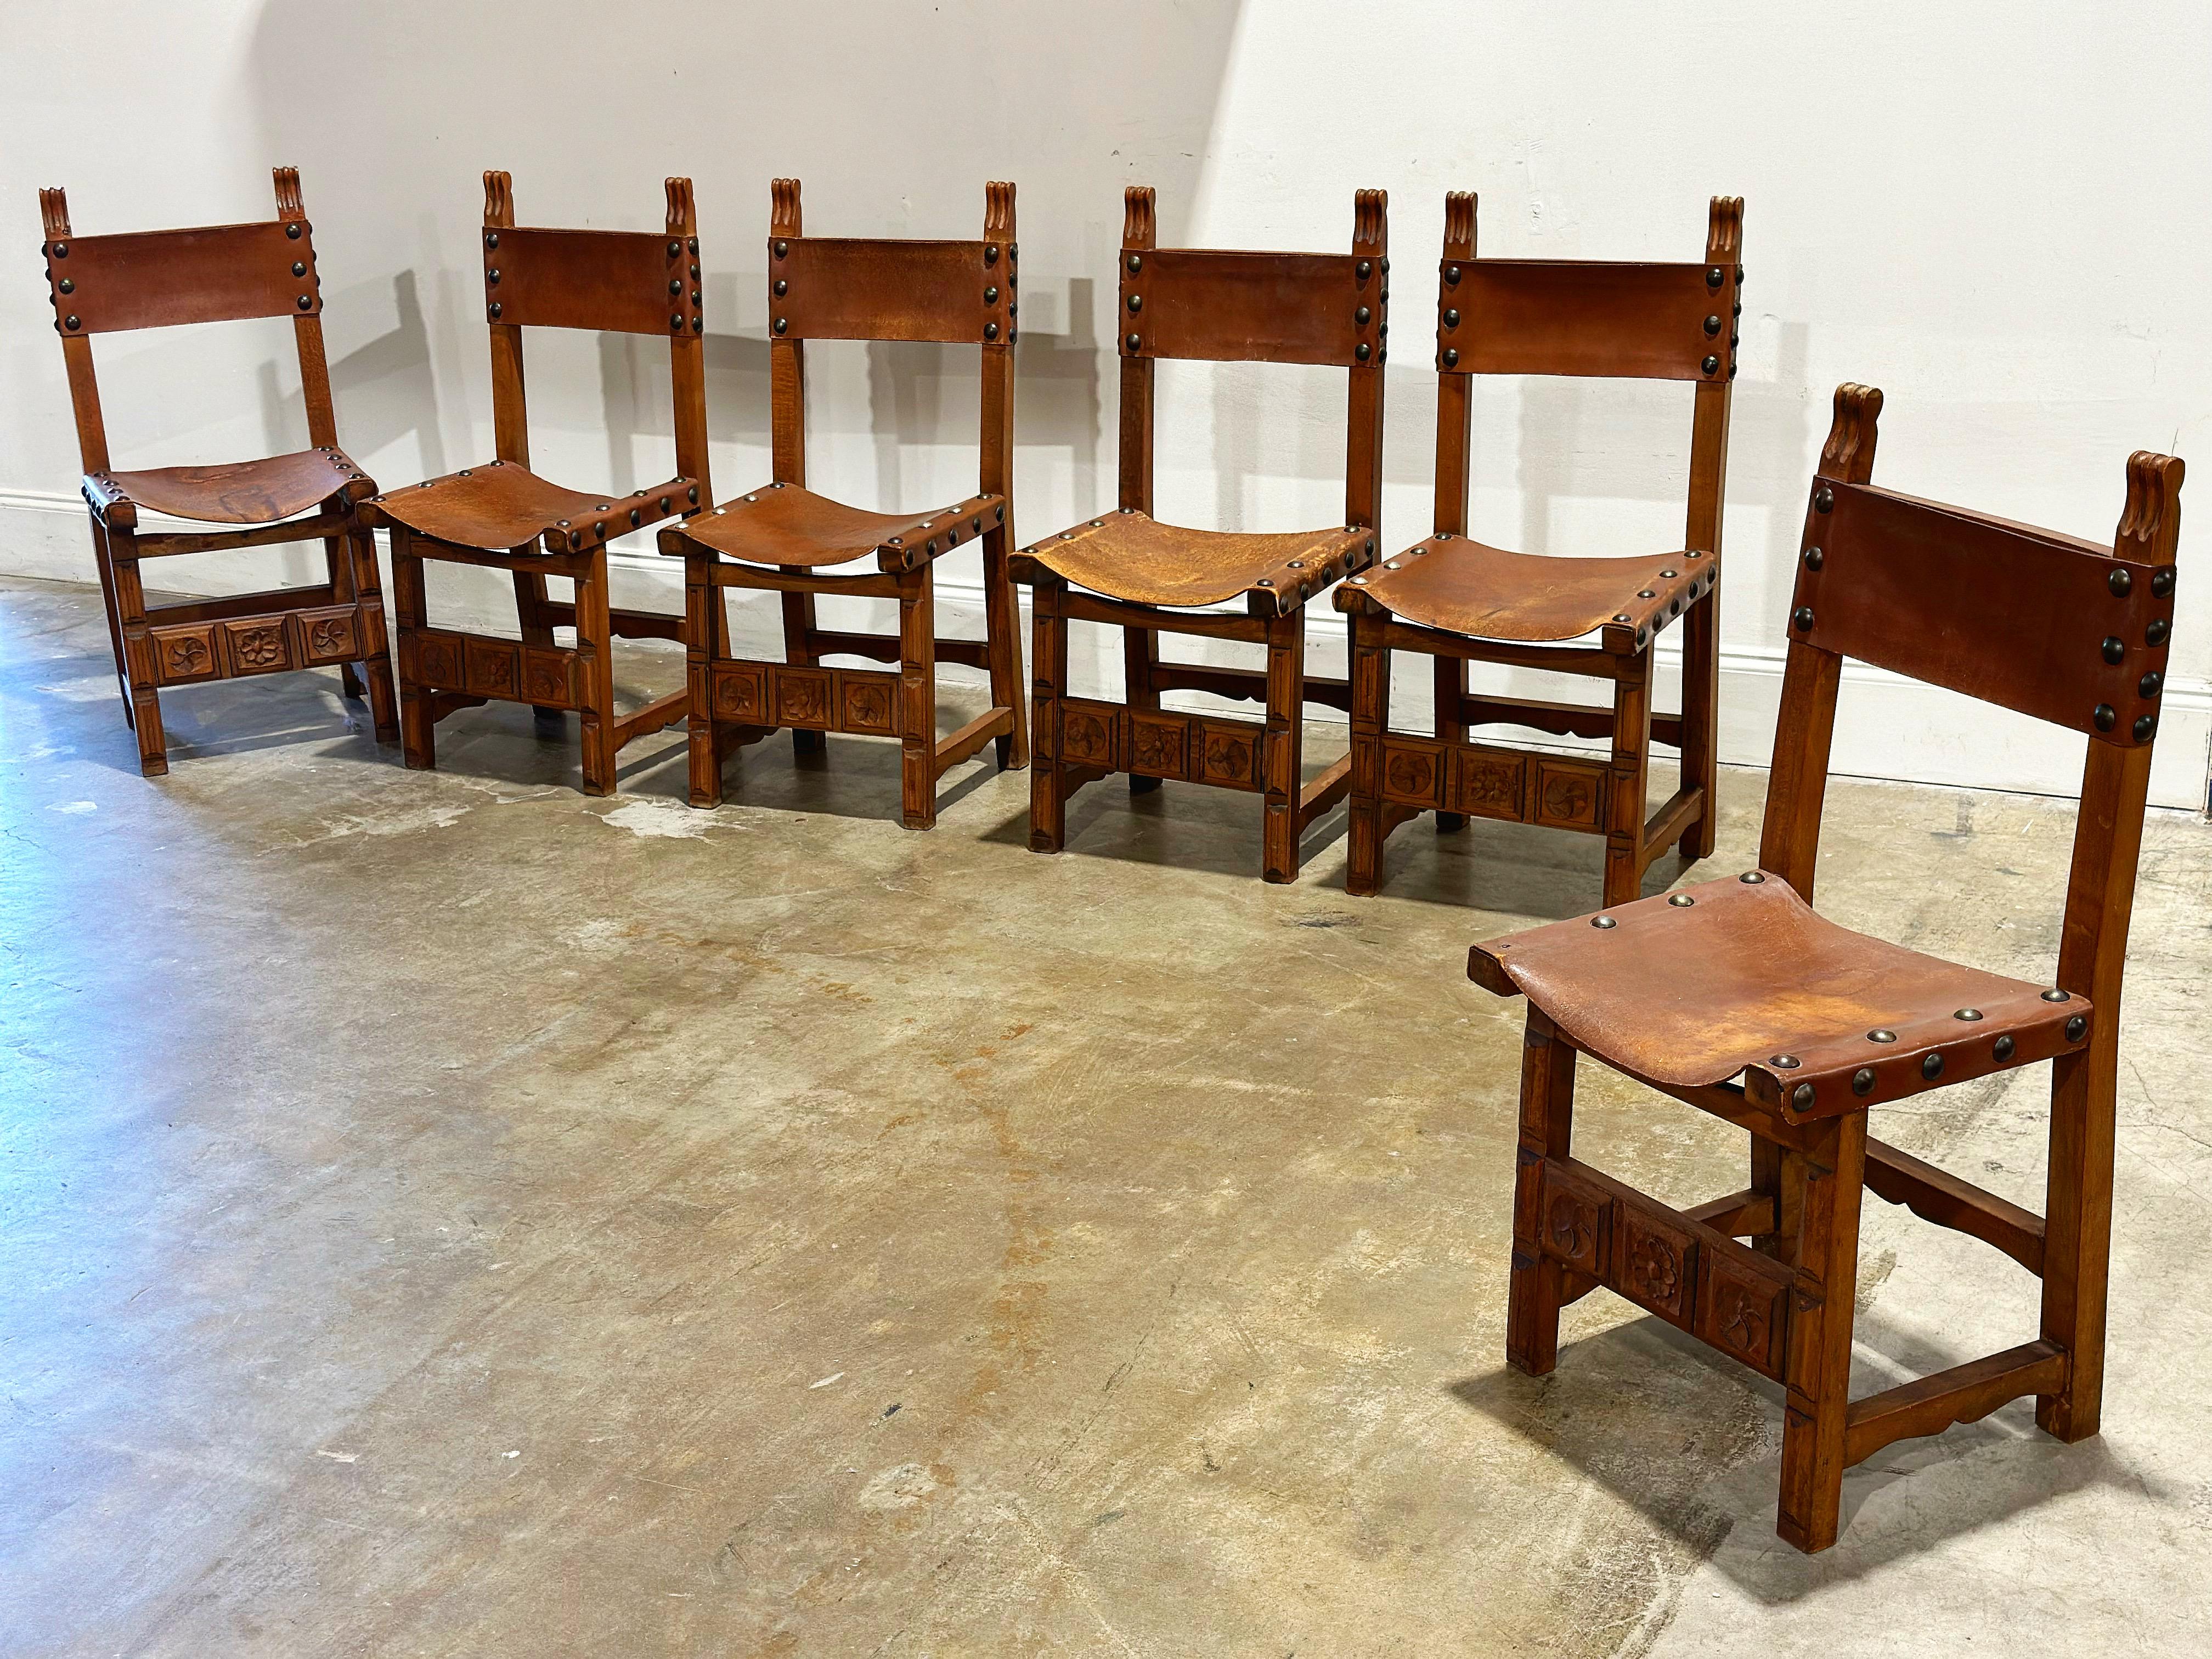 Set of 6 midcentury Spanish Revival style Brutalist dining chairs. Leather seat and back rest on heavy carved oak frames. Steel studs. In impressive original condition with minor wear. Frames are sound and sturdy. Leather seats and backs display a